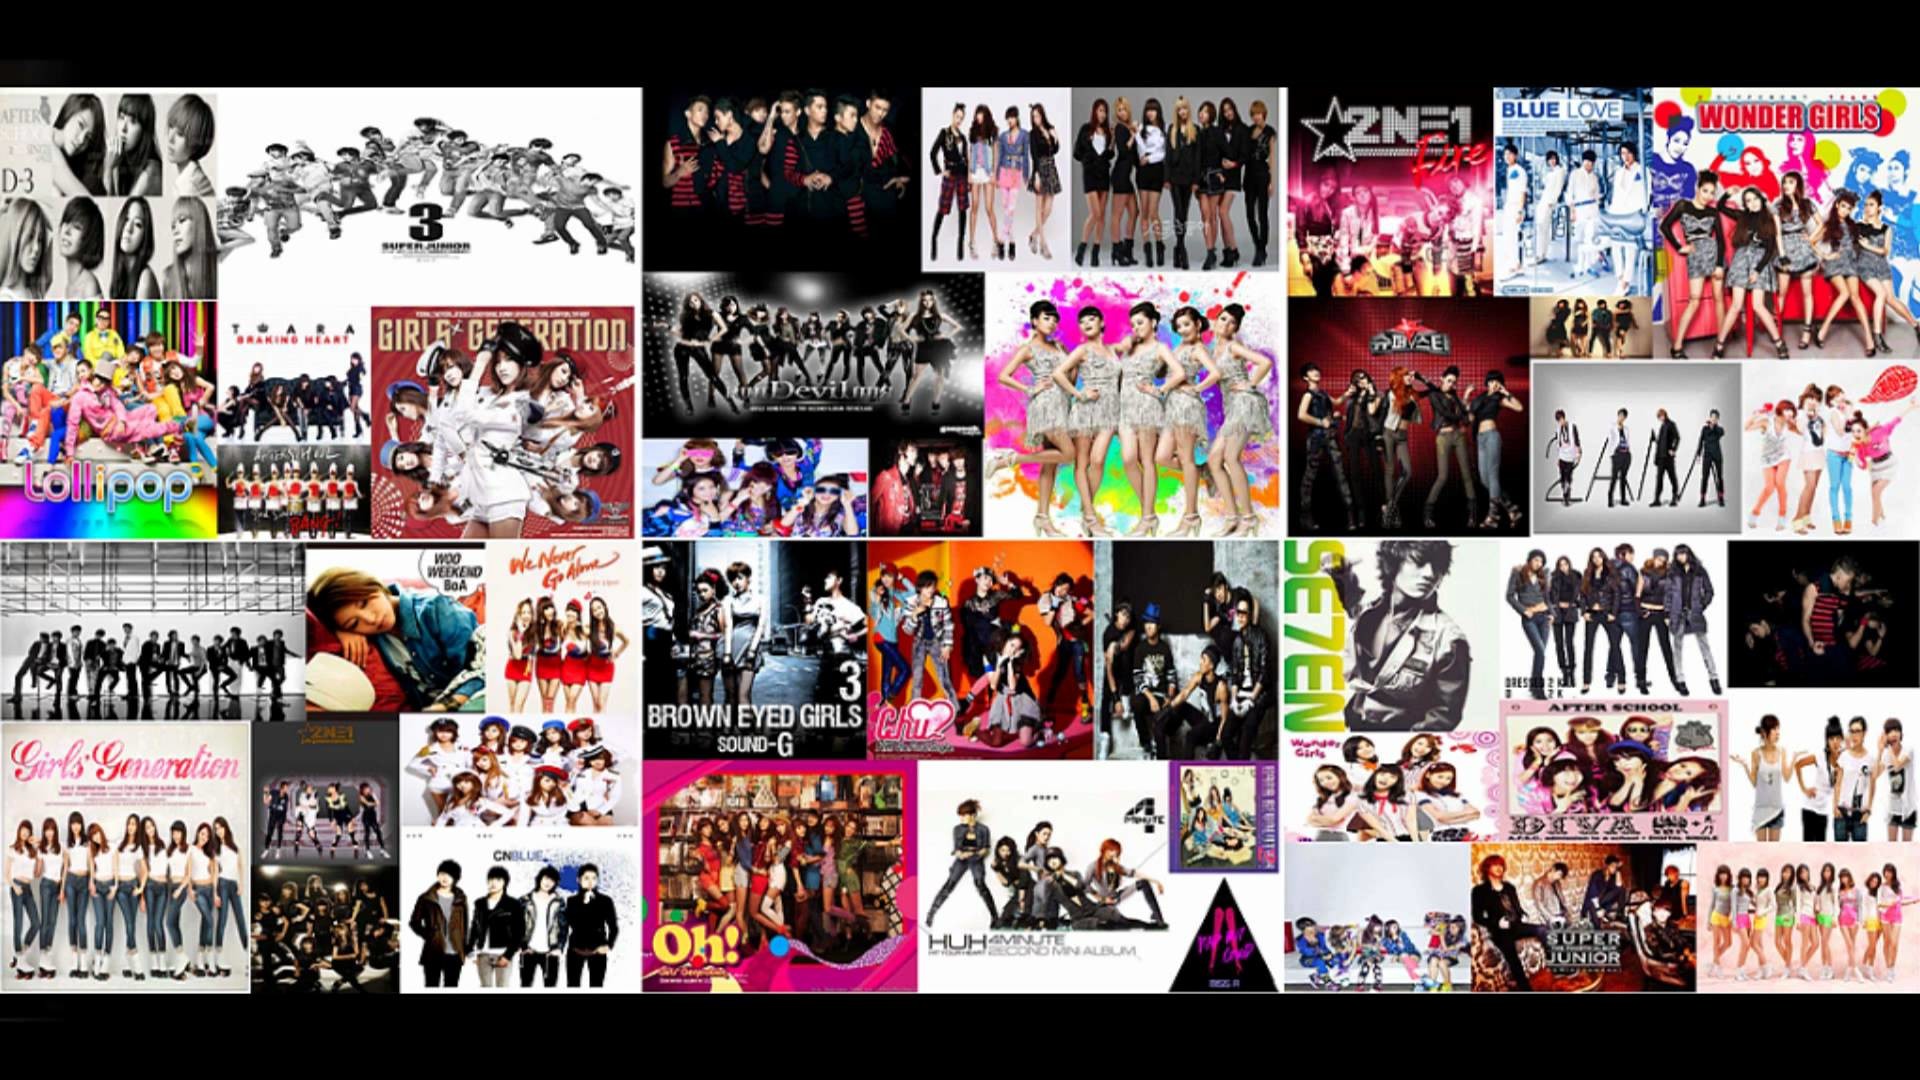 1920x1080 SNSD Hoot , 2PM & KPOP Wallpapers + Download